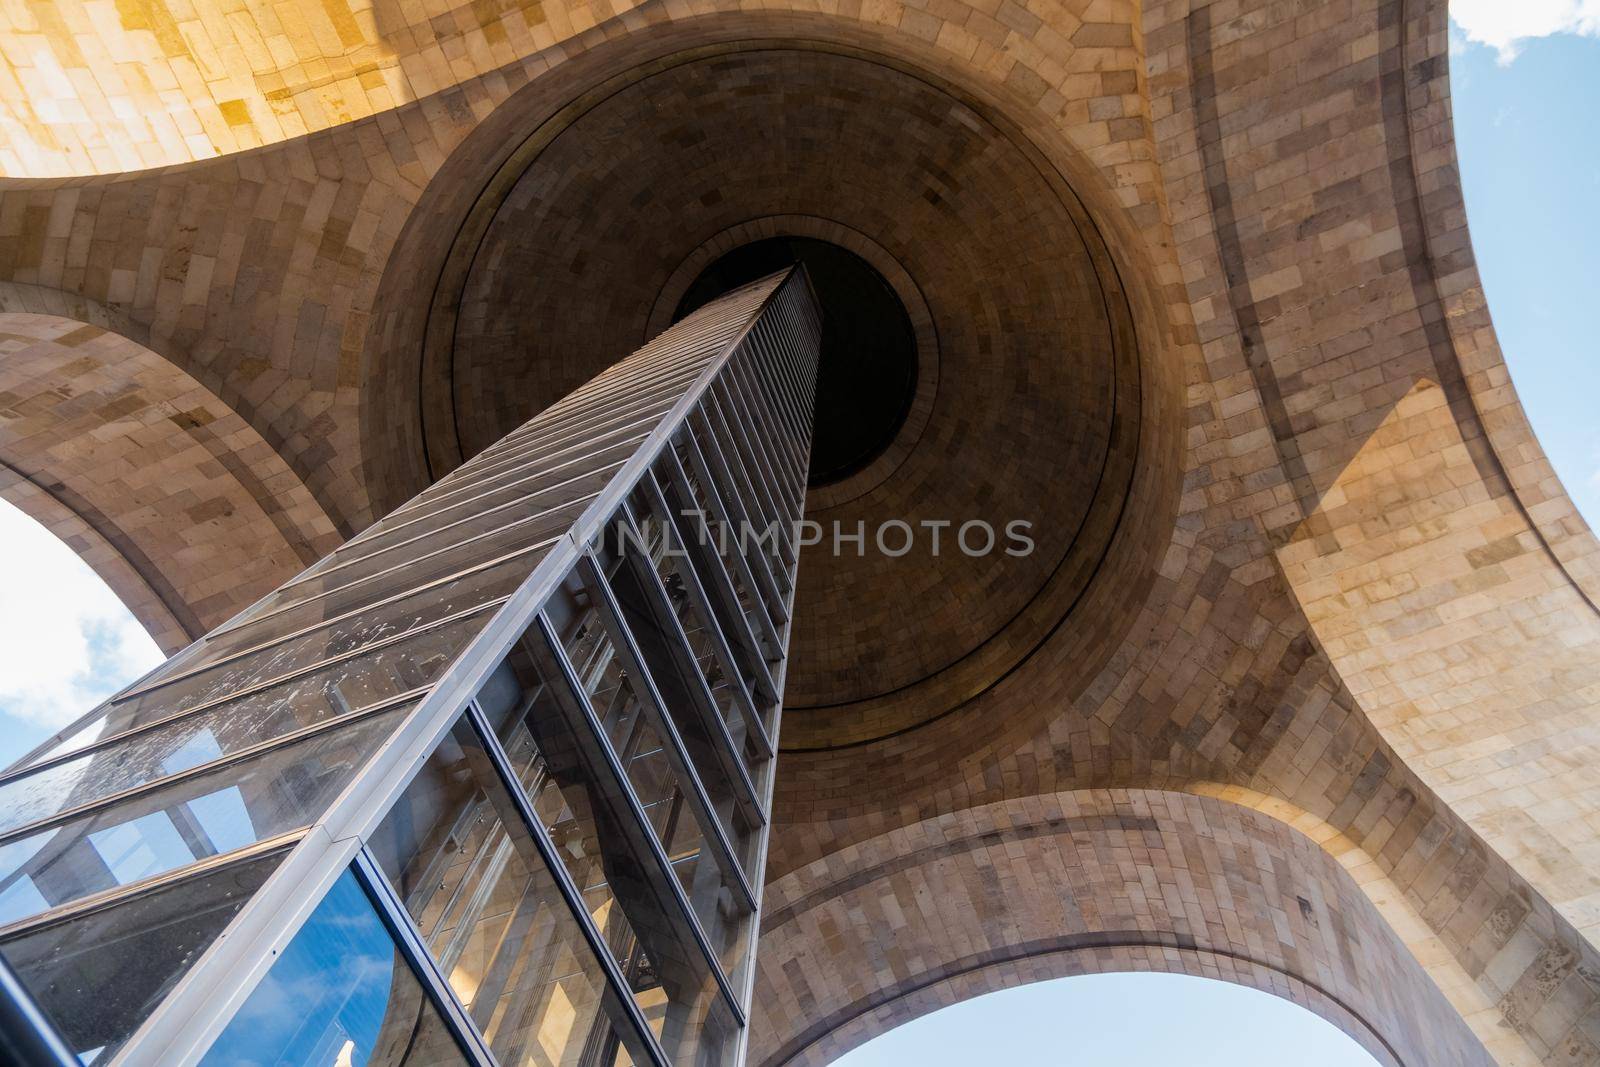 Low angle view of the interior and glass elevator of the Monument to the Revolution. Majestic triumphal arch in Mexico City with slightly cloudy sky as background. Mexican landmarks